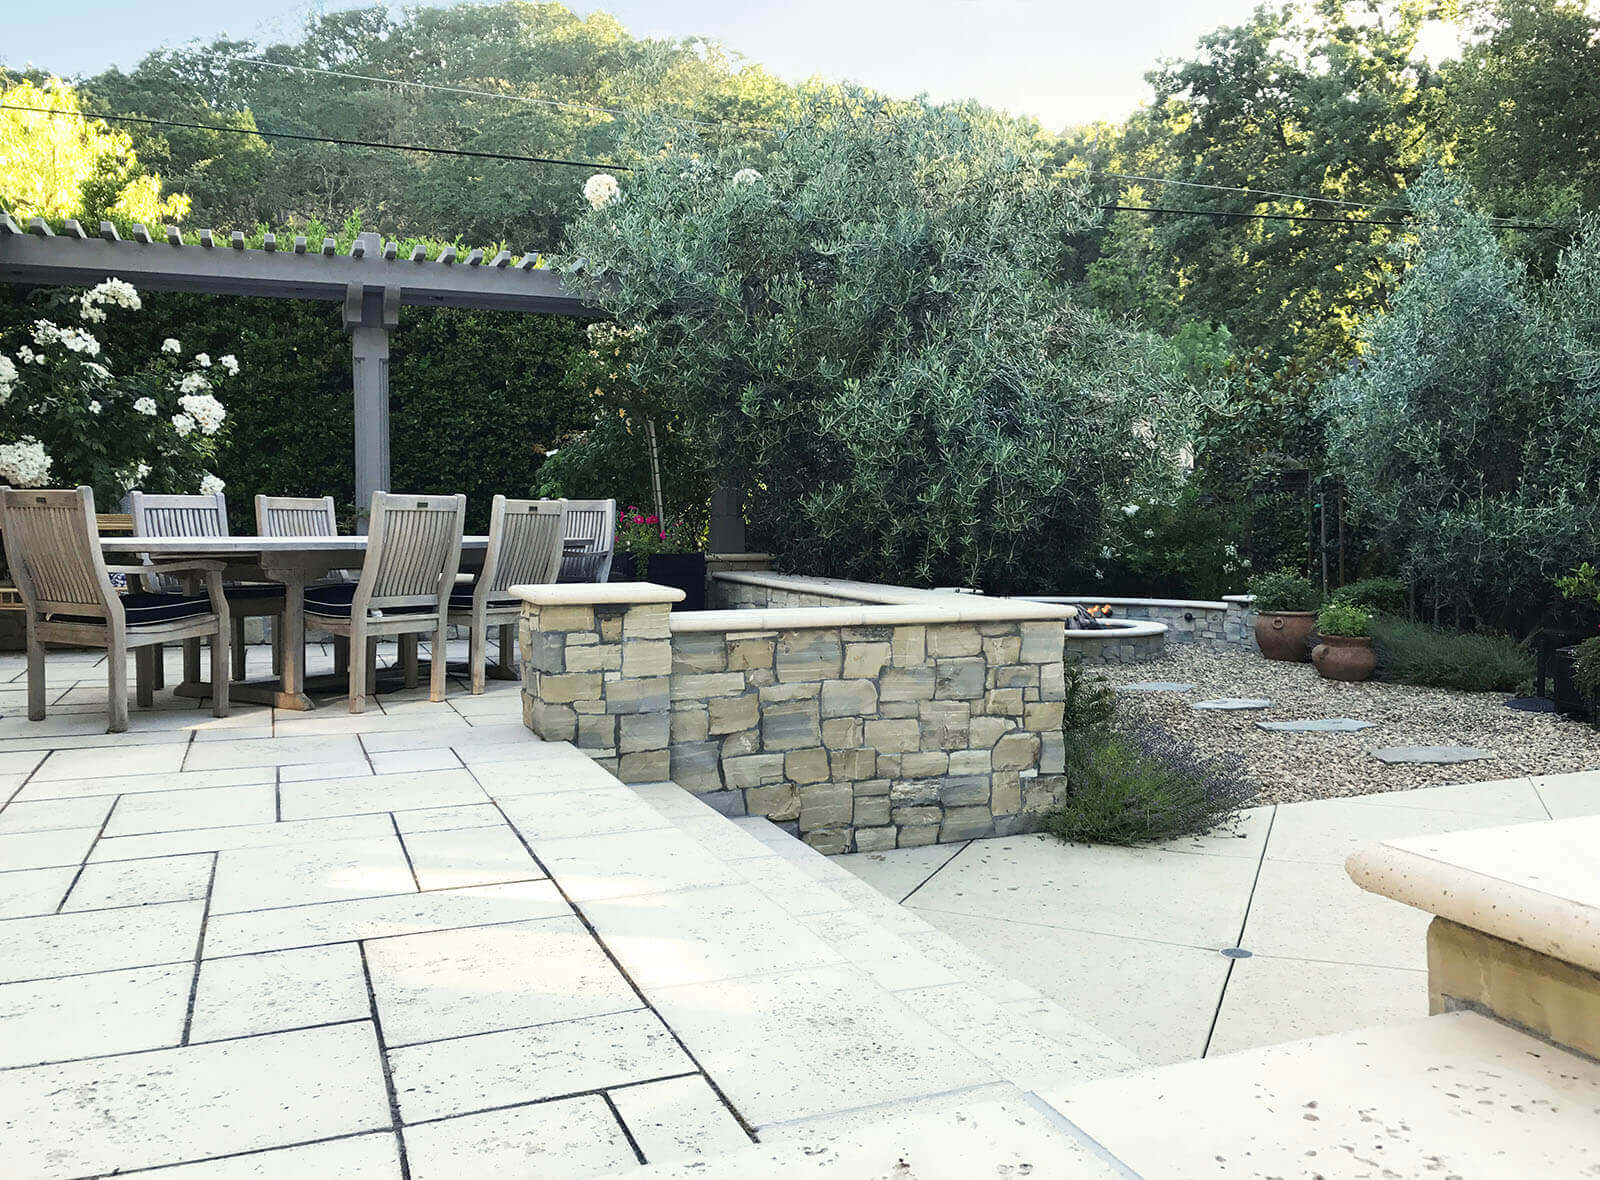 Travertine-tiled terraced patio with gravel area and Mediterranean planting